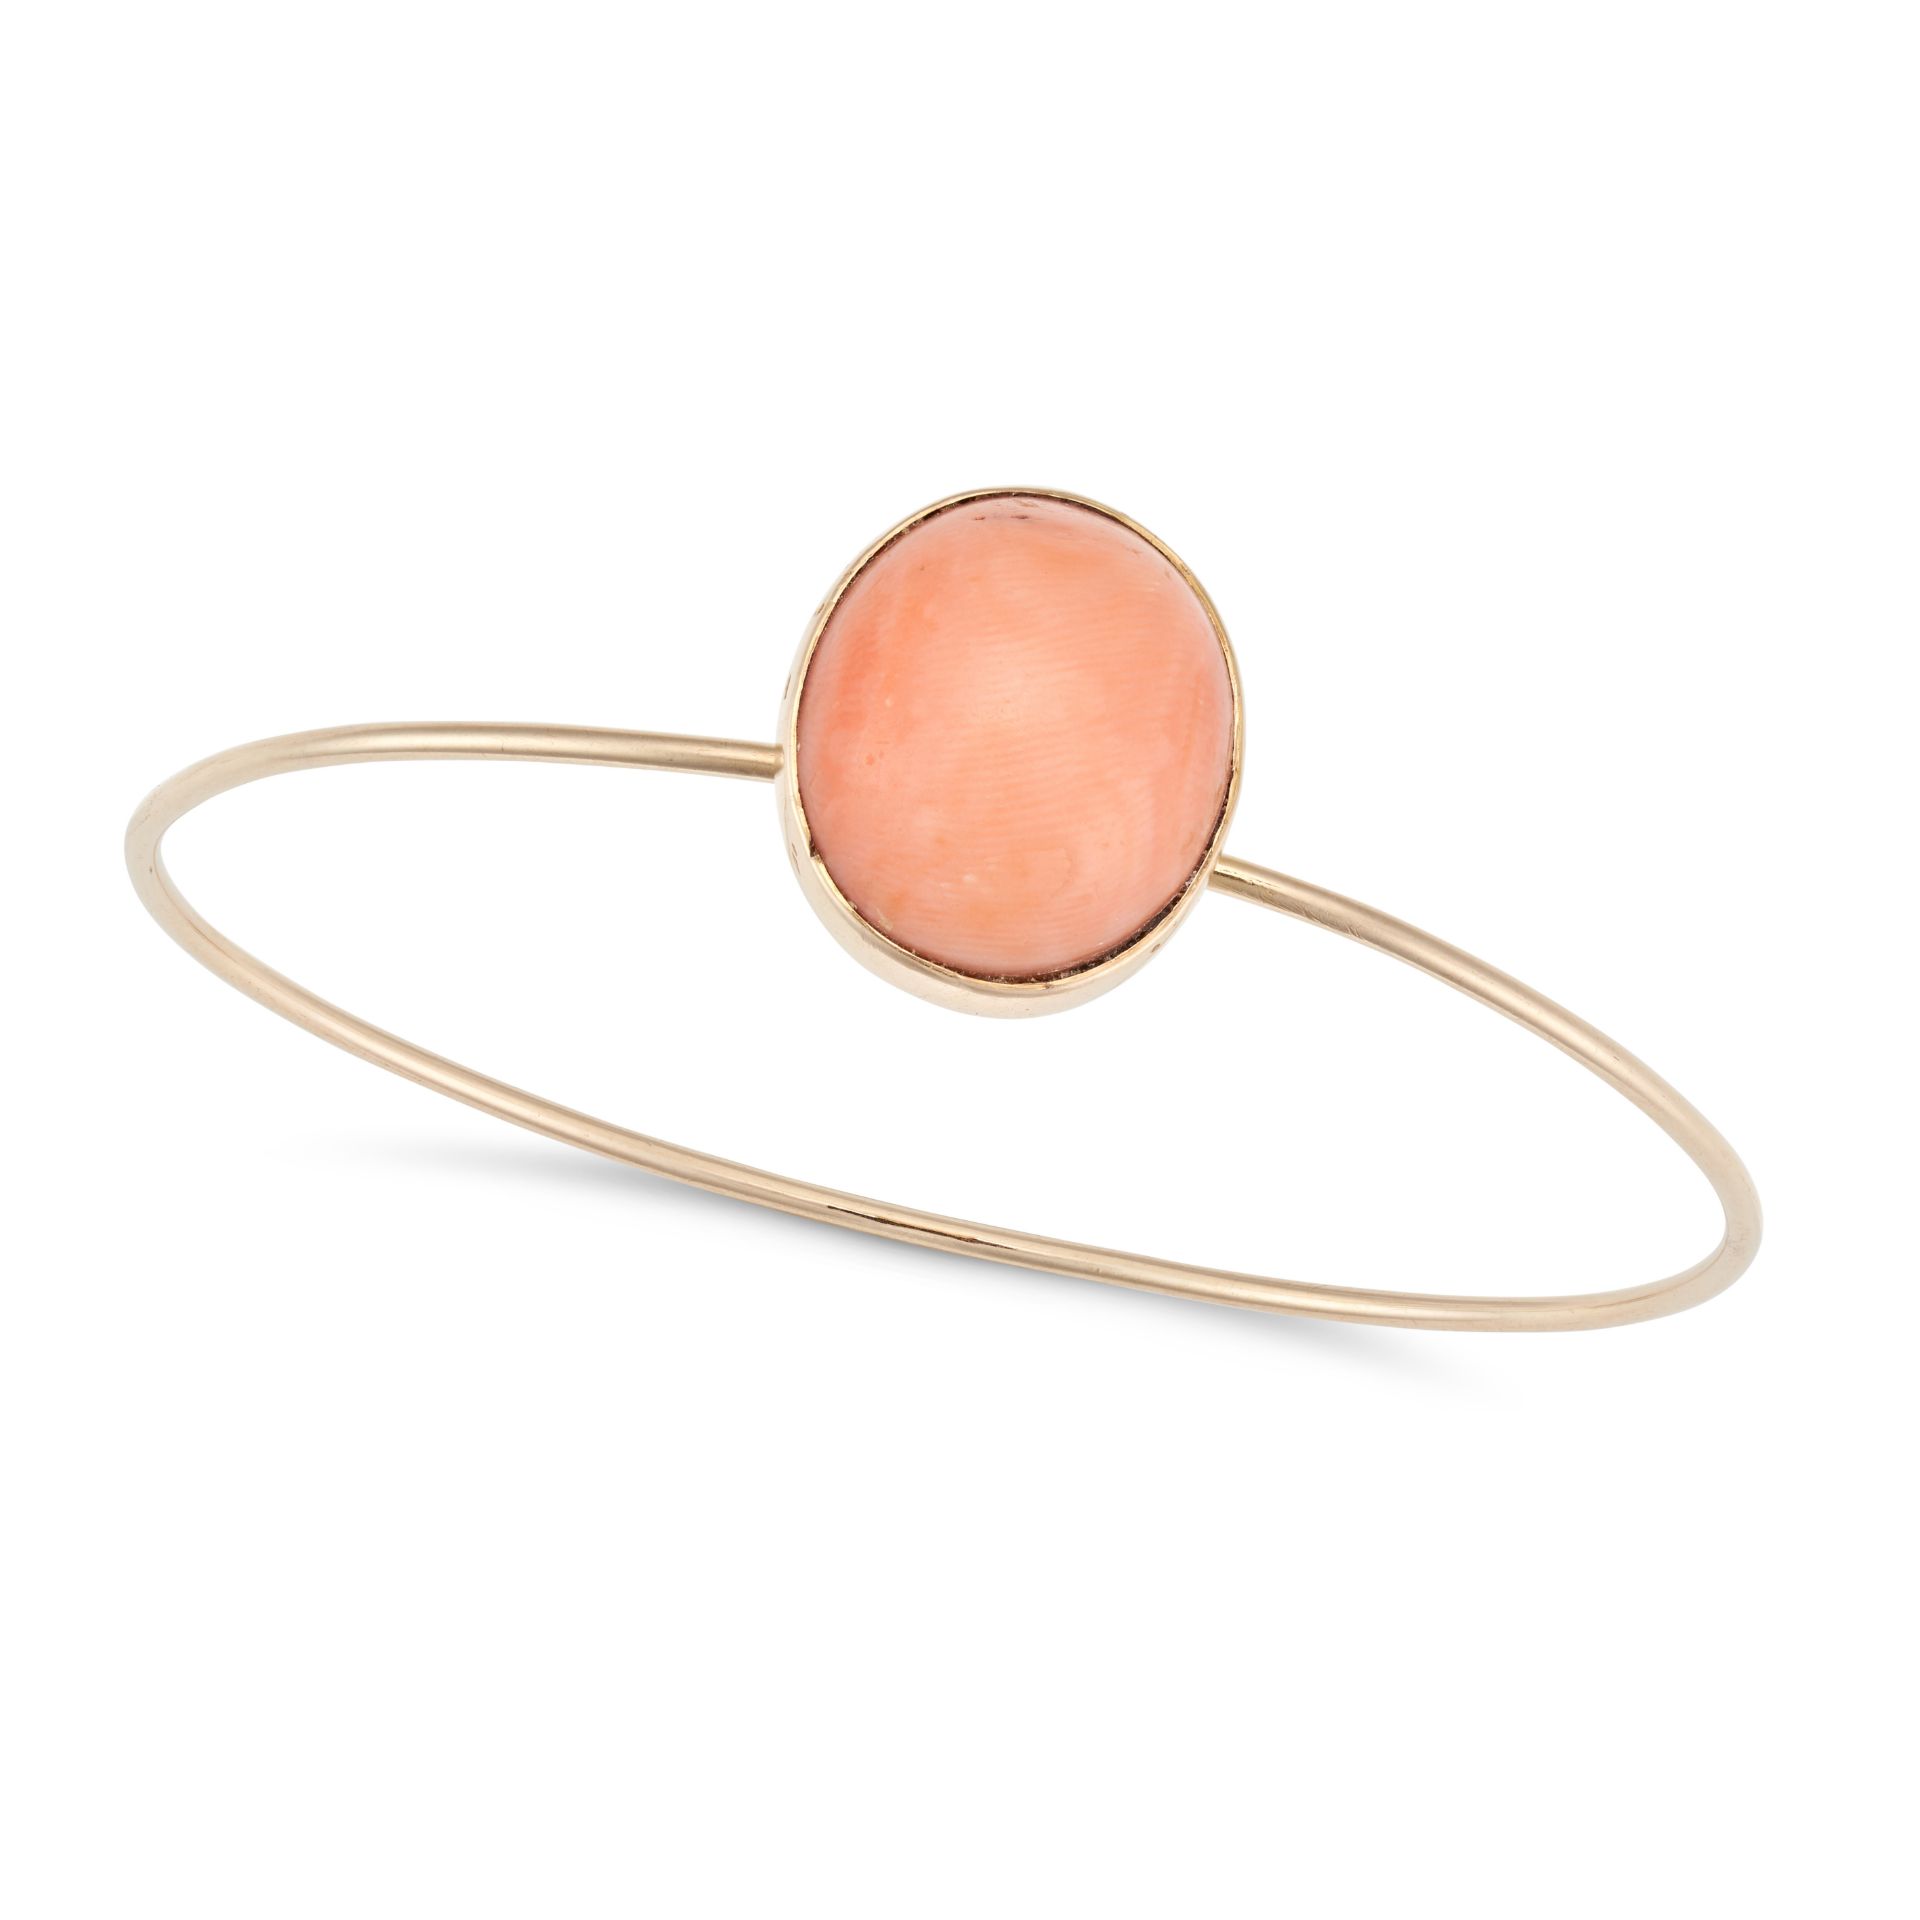 NO RESERVE - A CORAL BANGLE set with an oval cabochon coral, no assay marks, inner circumference ...